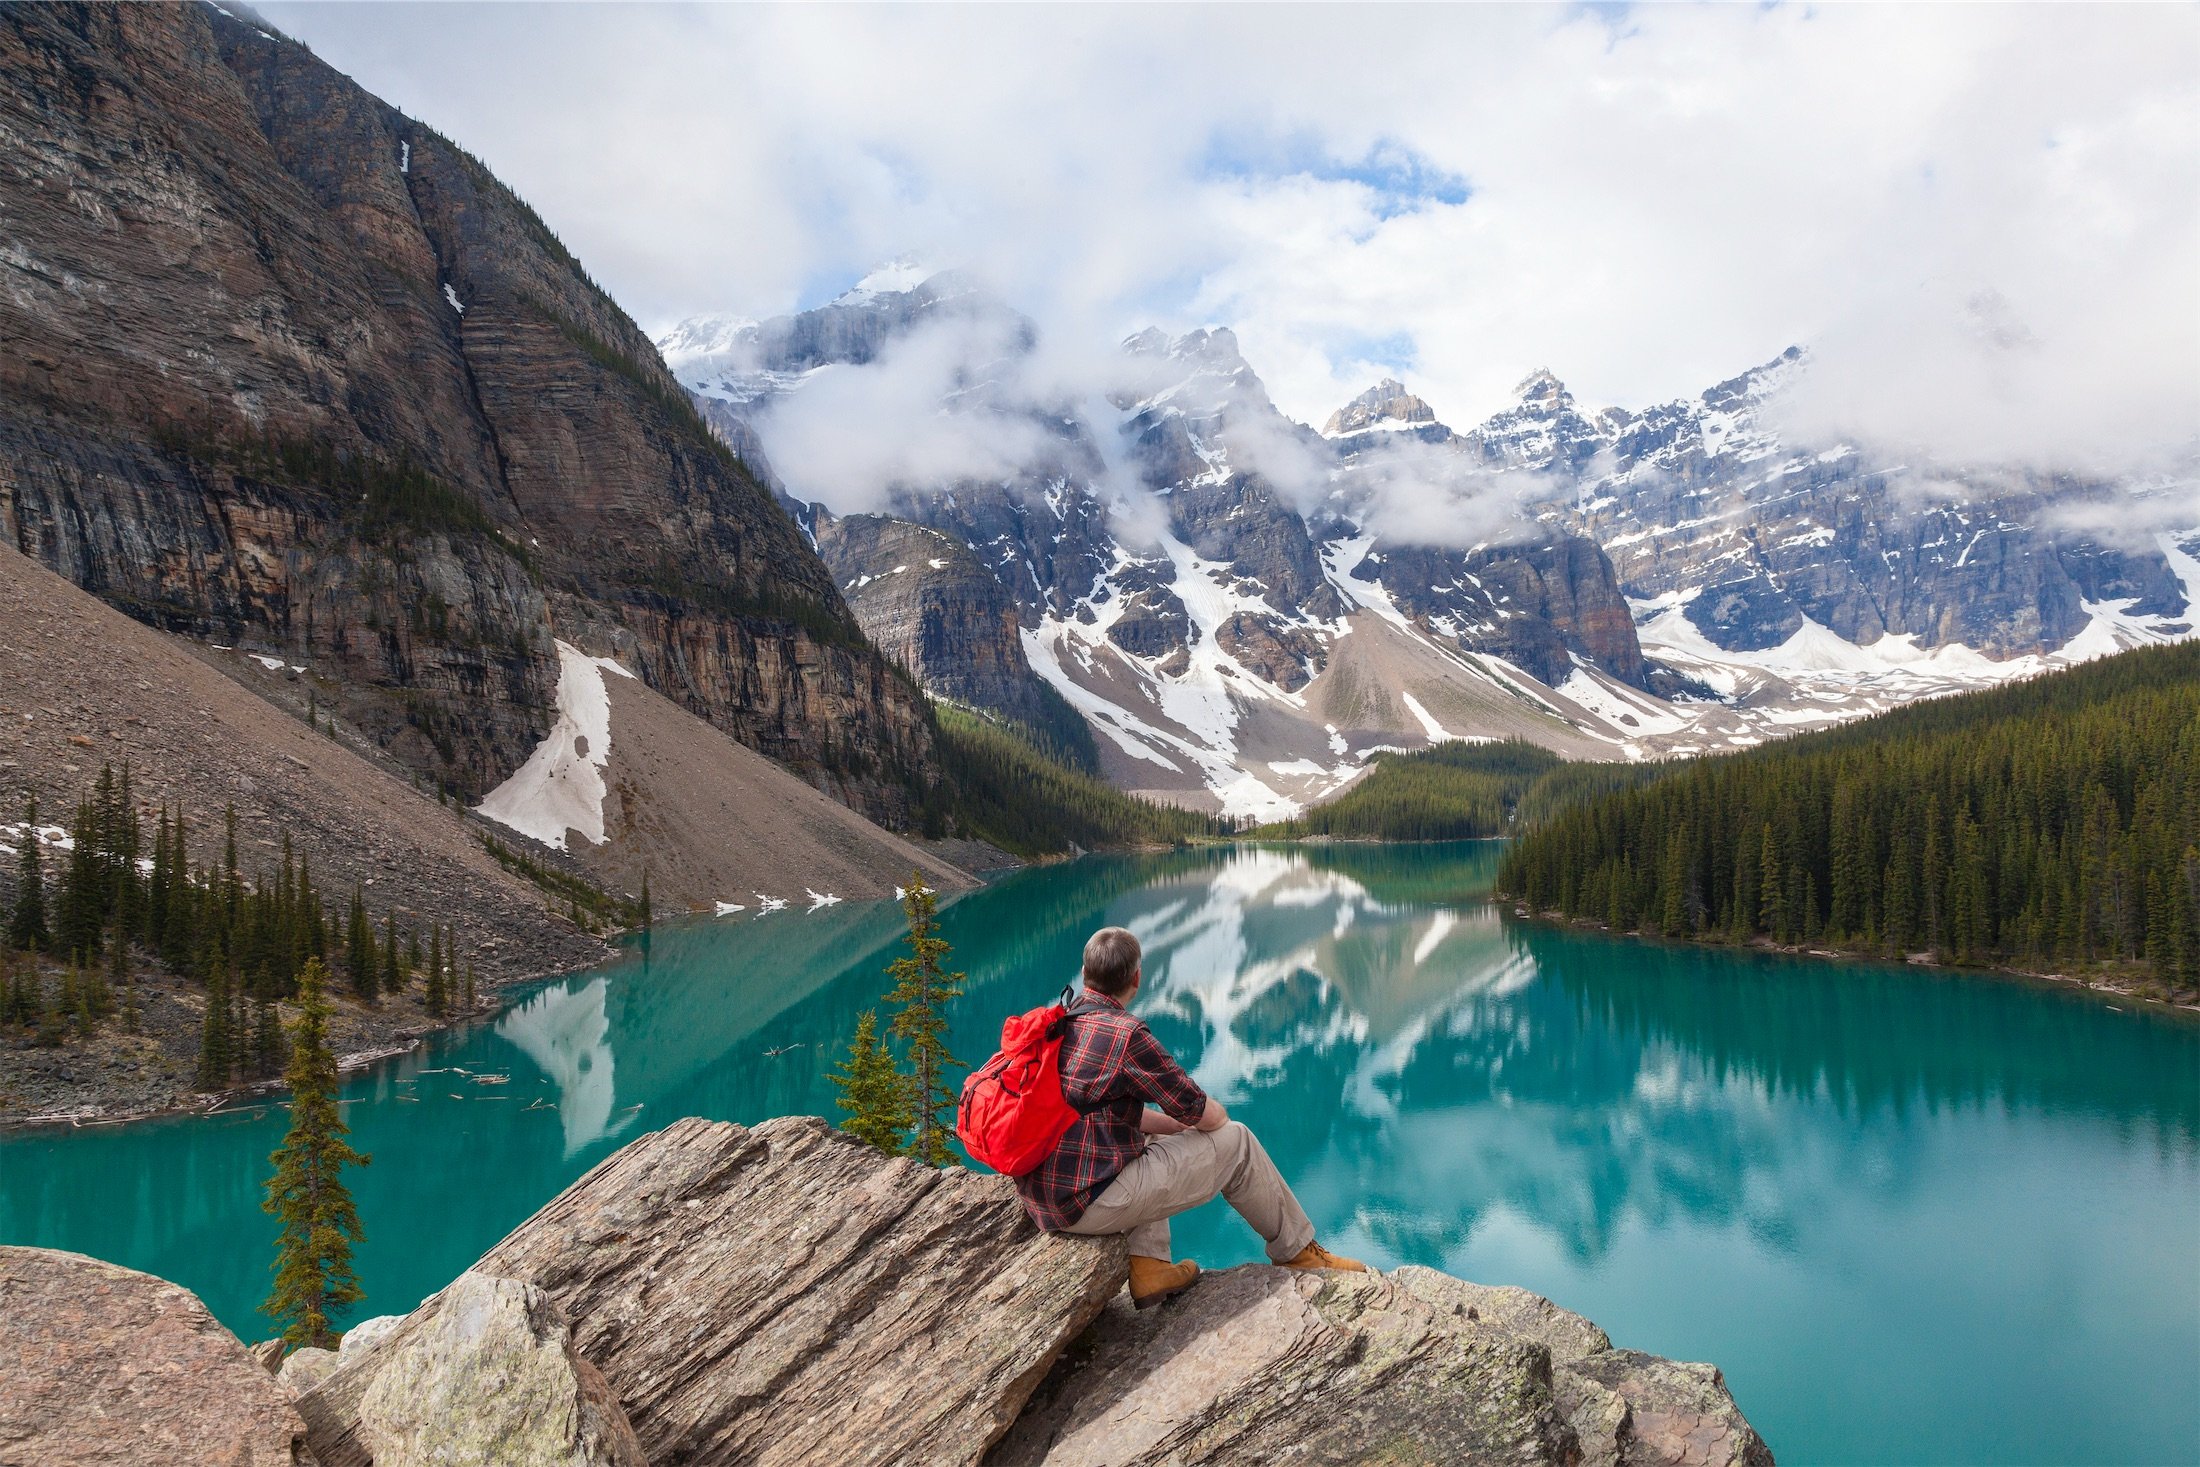 person hiking sits on a rocky edge with lake and mountains in the background